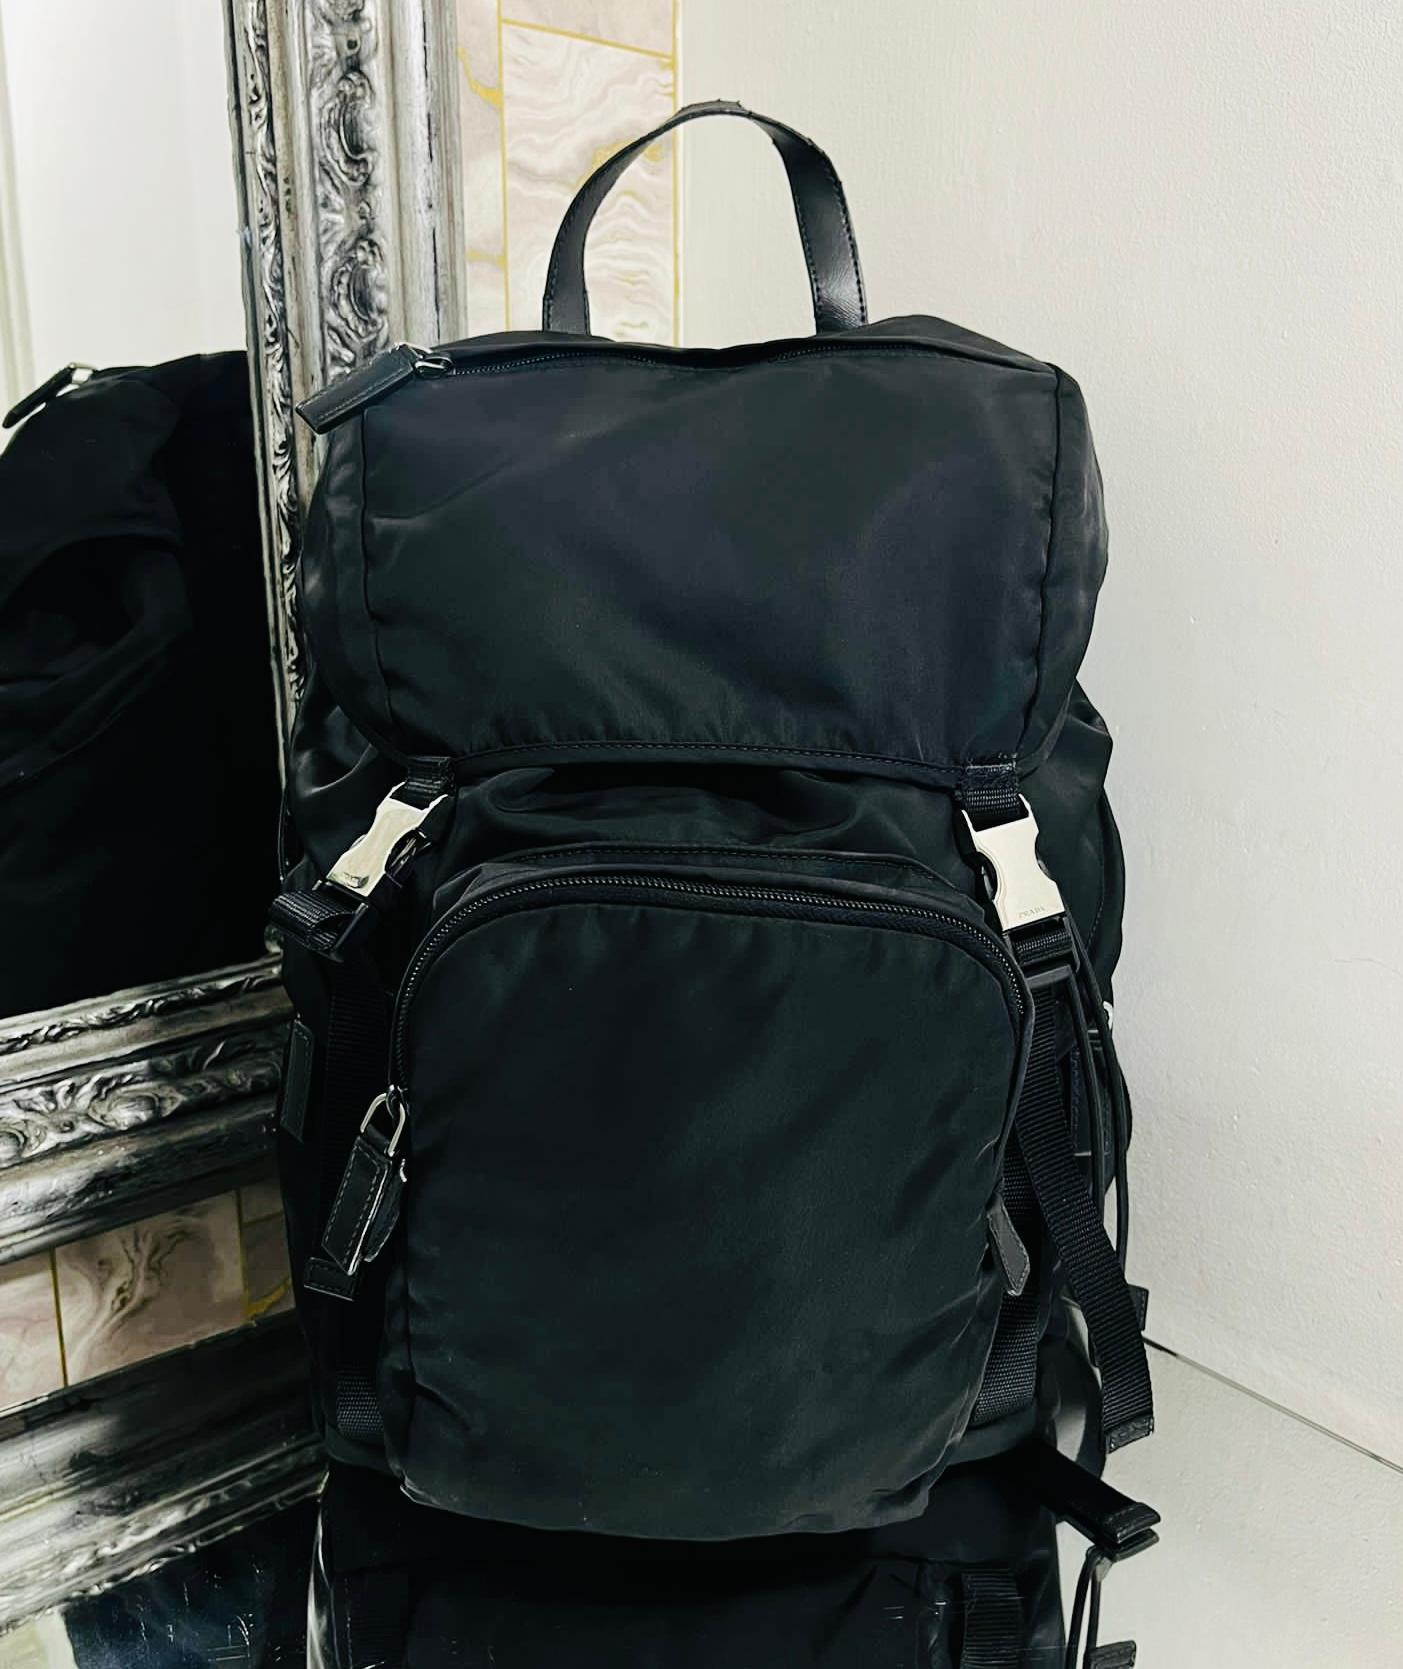 Prada Tessuto Montagna Backpack

Black backpack designed with double 'Prada' engraved silver buckle to the front.

Featuring adjustable straps, zipped compartment to the centre and side zip pockets.

Flap front closure leading to top cinch cord that